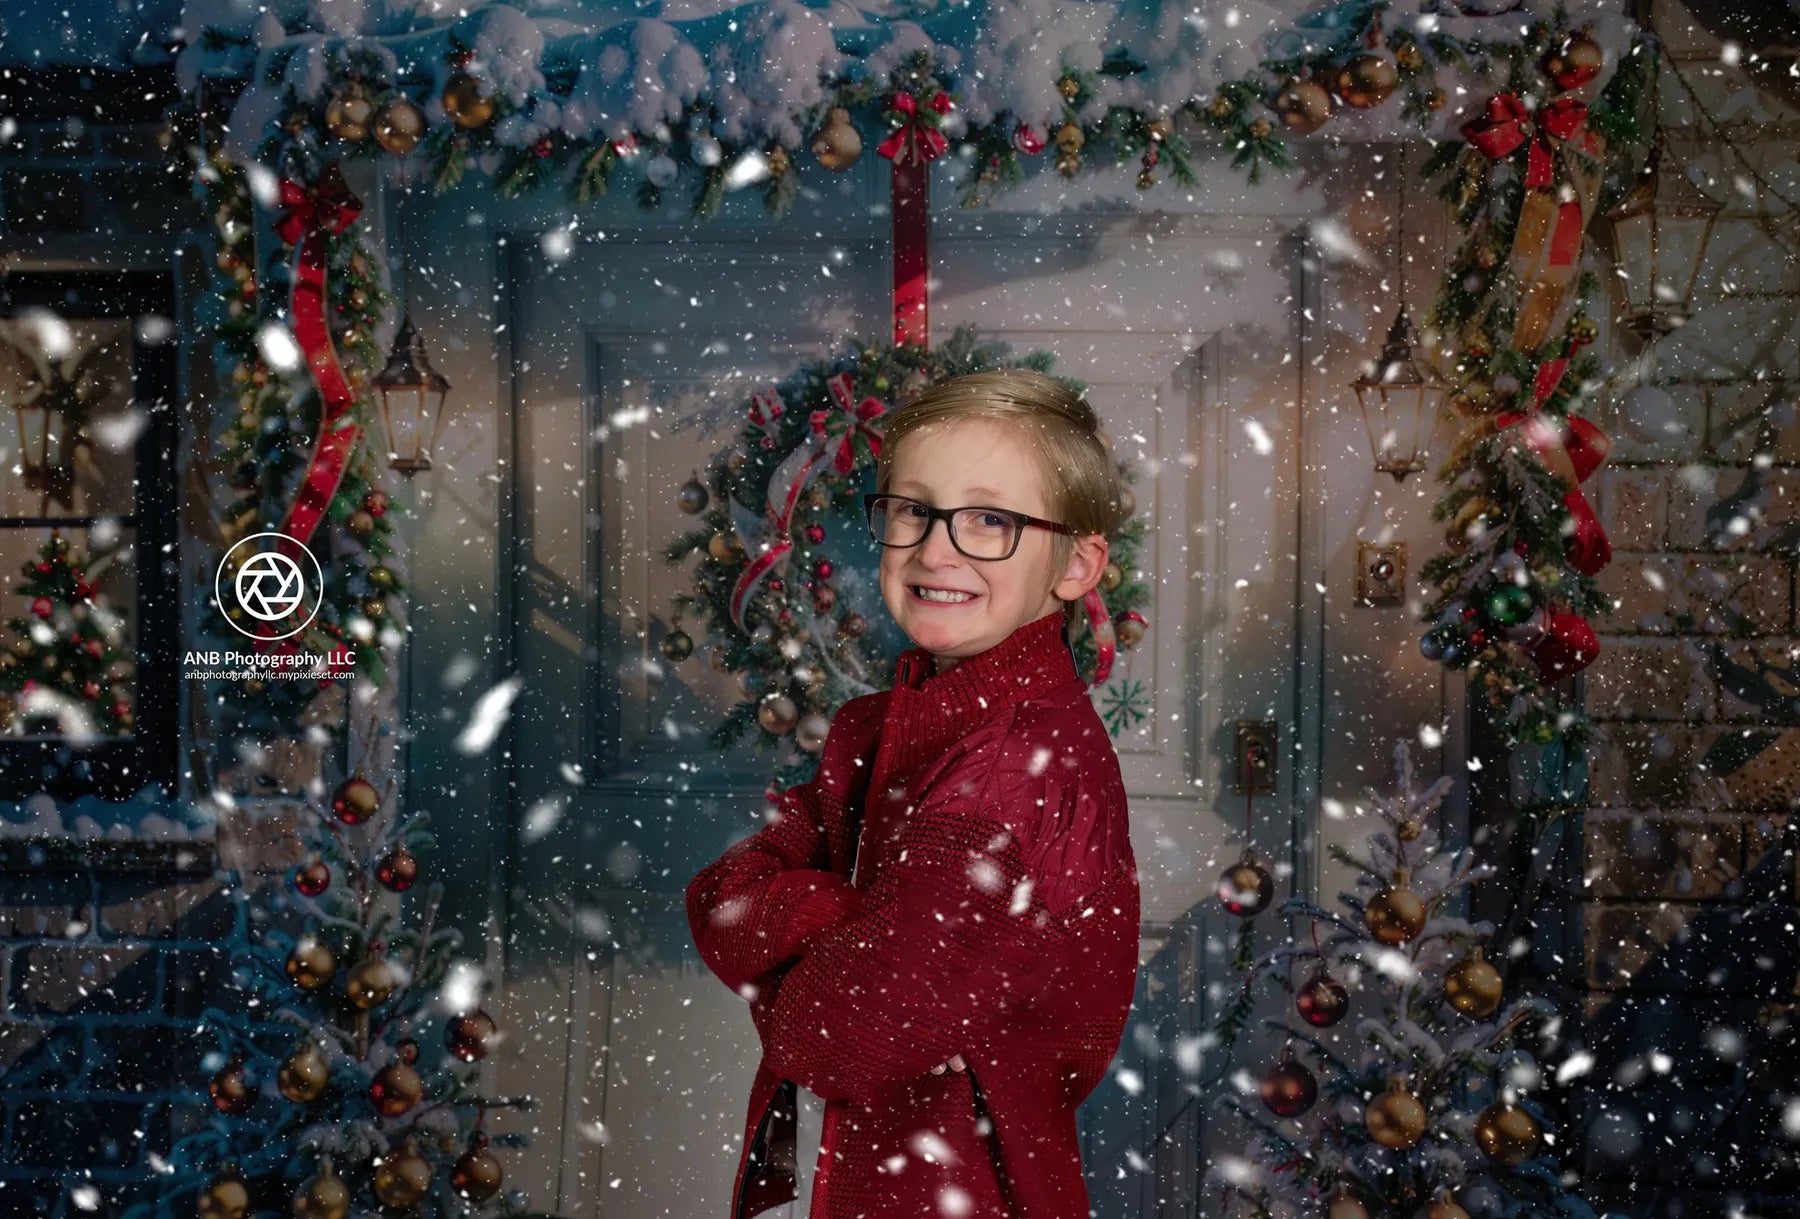 Kate Christmas Snowy Door Backdrop for Photography